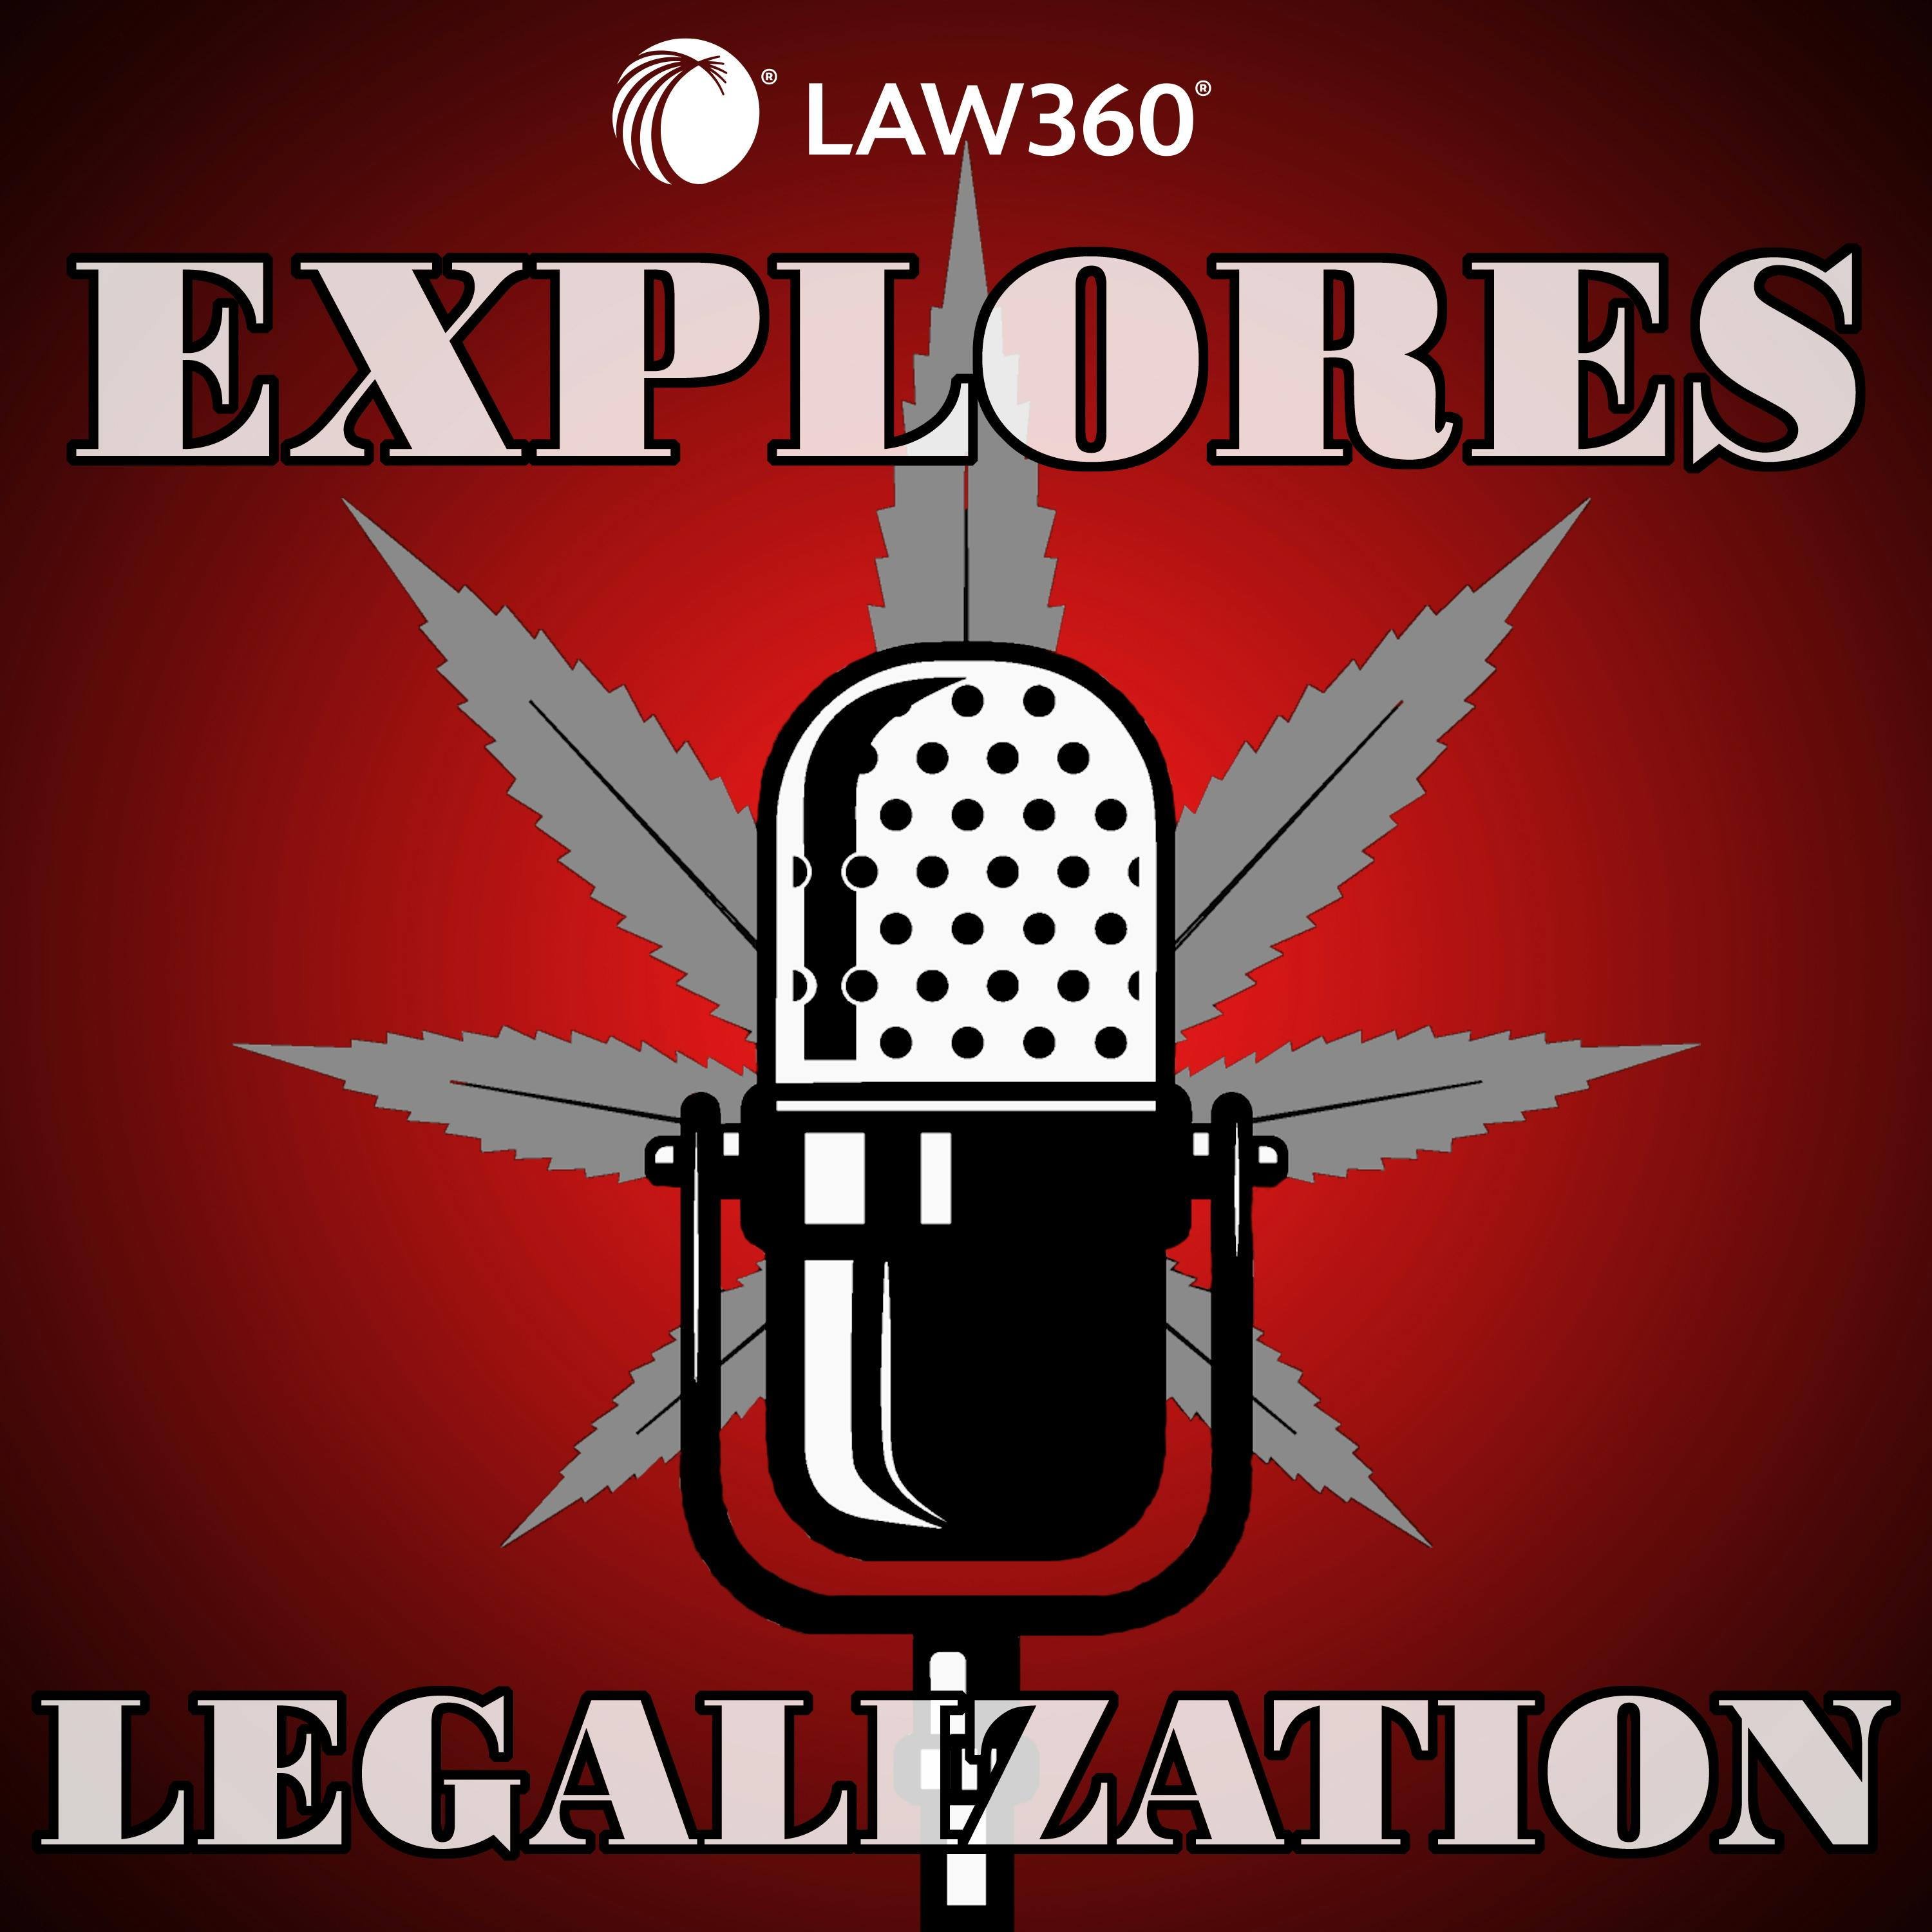 Welcome To Law360 Explores: Legalization